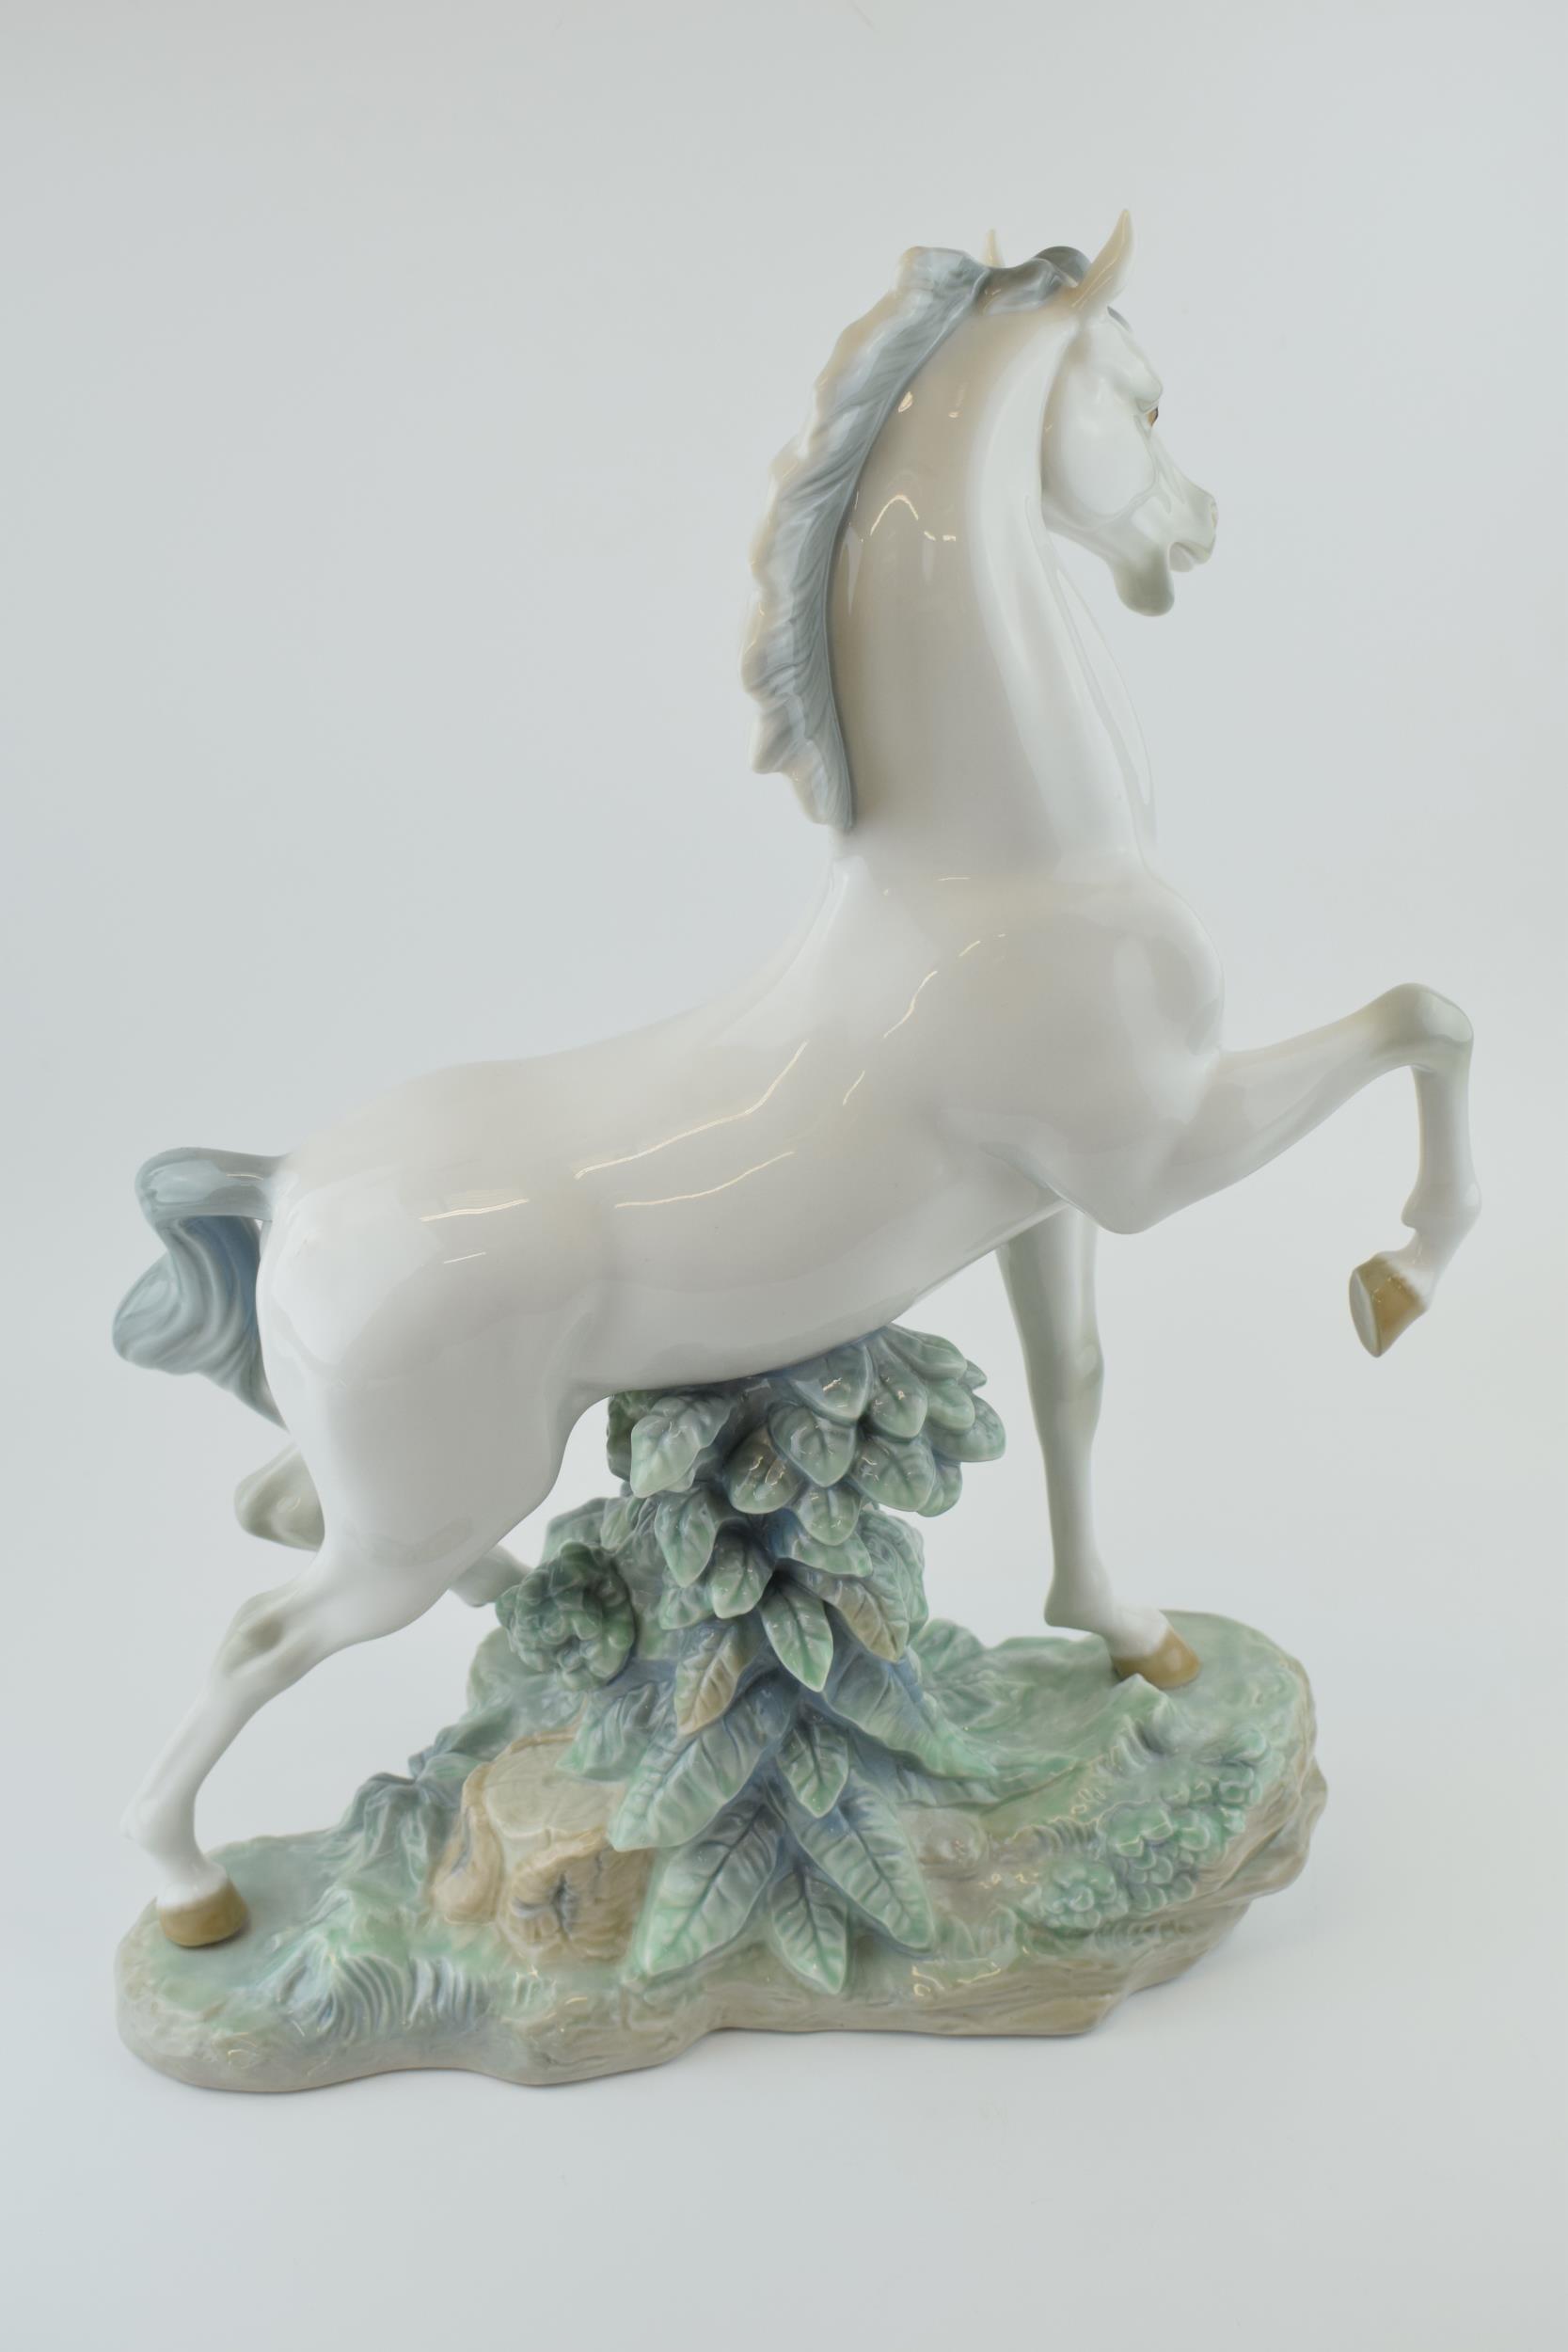 Large Lladro horse figure 'Caballo Arrogante' 4781, 44cm tall. In good condition with no obvious - Image 4 of 5